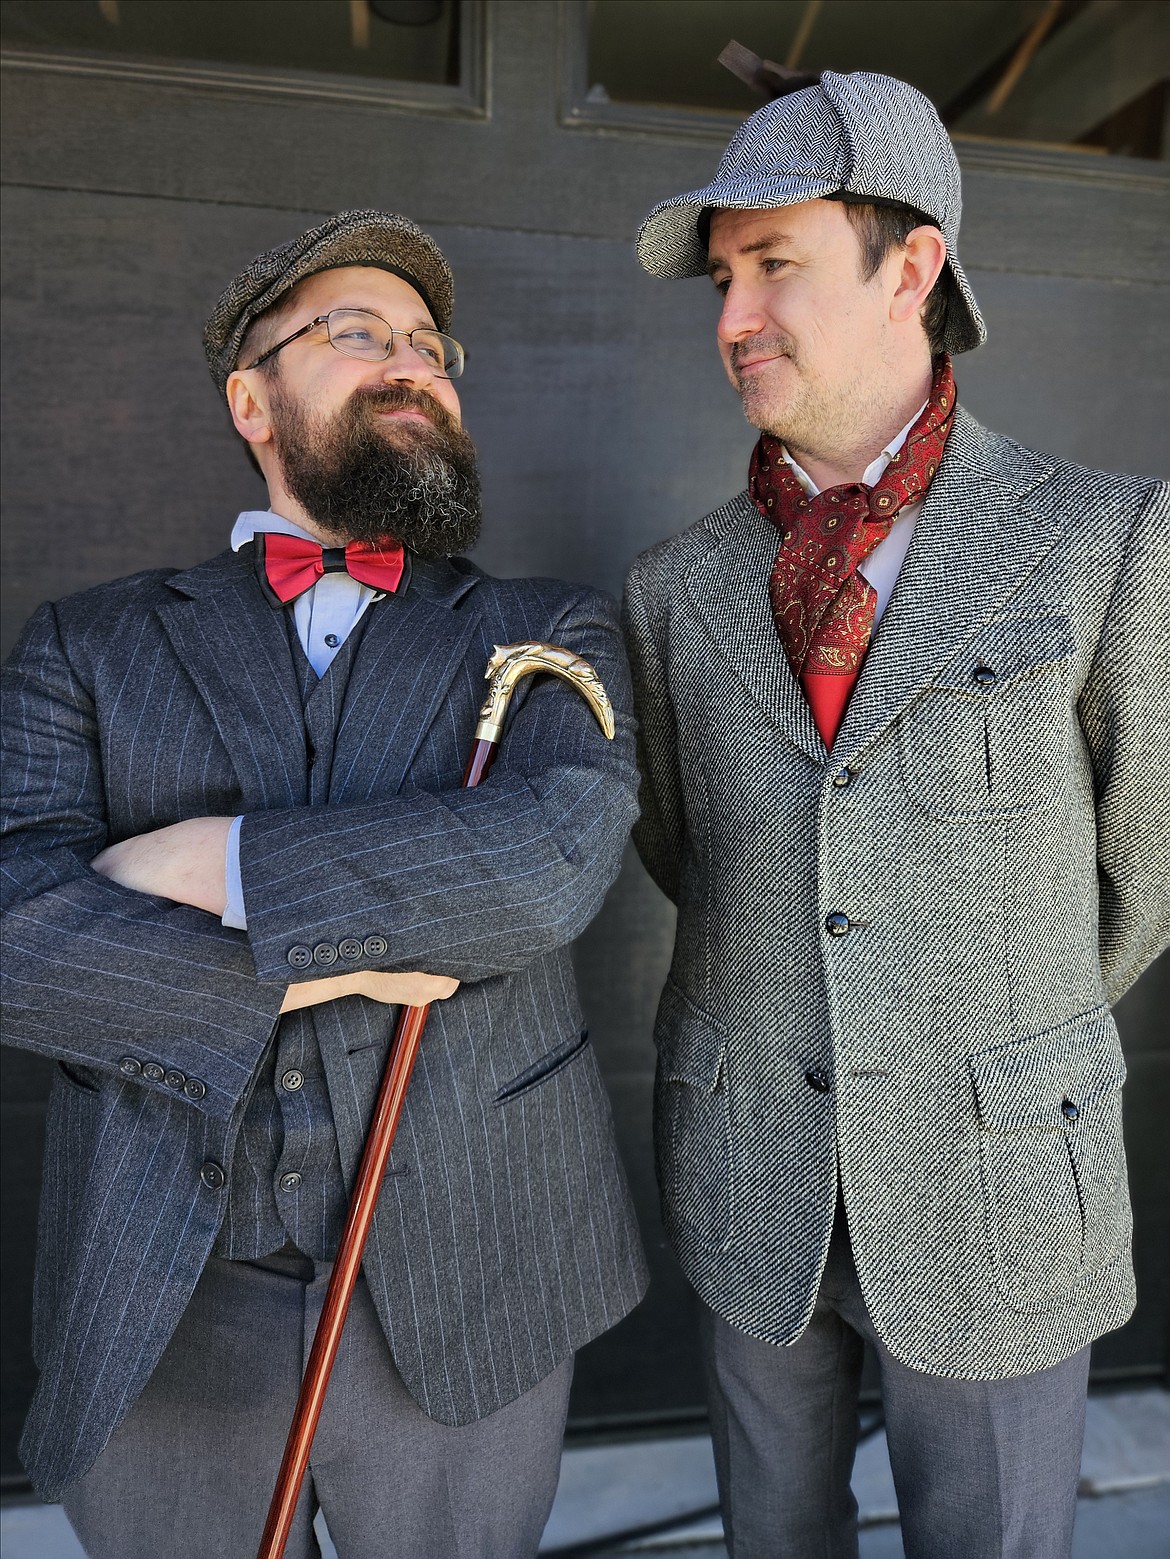 Sandpoint Onstage is premiering a BBC-style 1900s original Sherlock adventure on the main stage of the Panida Theater in an evening of mystery, comedy and emotional complexity by Sandpoint playwright Teresa Pesce. Performances will be held Friday and Saturday, April 19-20, at 7:30 p.m.; Sunday, April 21, a 2 p.m. matinee; and Saturday, April 27 at 7:30 p.m. Tickets $25 online at panida.org and at the door. The play stars Eric Bond as the irrepressible Sherlock and Corey Repass as the imperturbable Watson, pictured above; along with Kate McAlister, Miriam Robinson, Michael Bigley, Andrew Sorg, Ashley Shalbreck, Scott Gossett, Shelly Johnson, McCallum Morgan, Dwight Webster, Robert Zweifel.